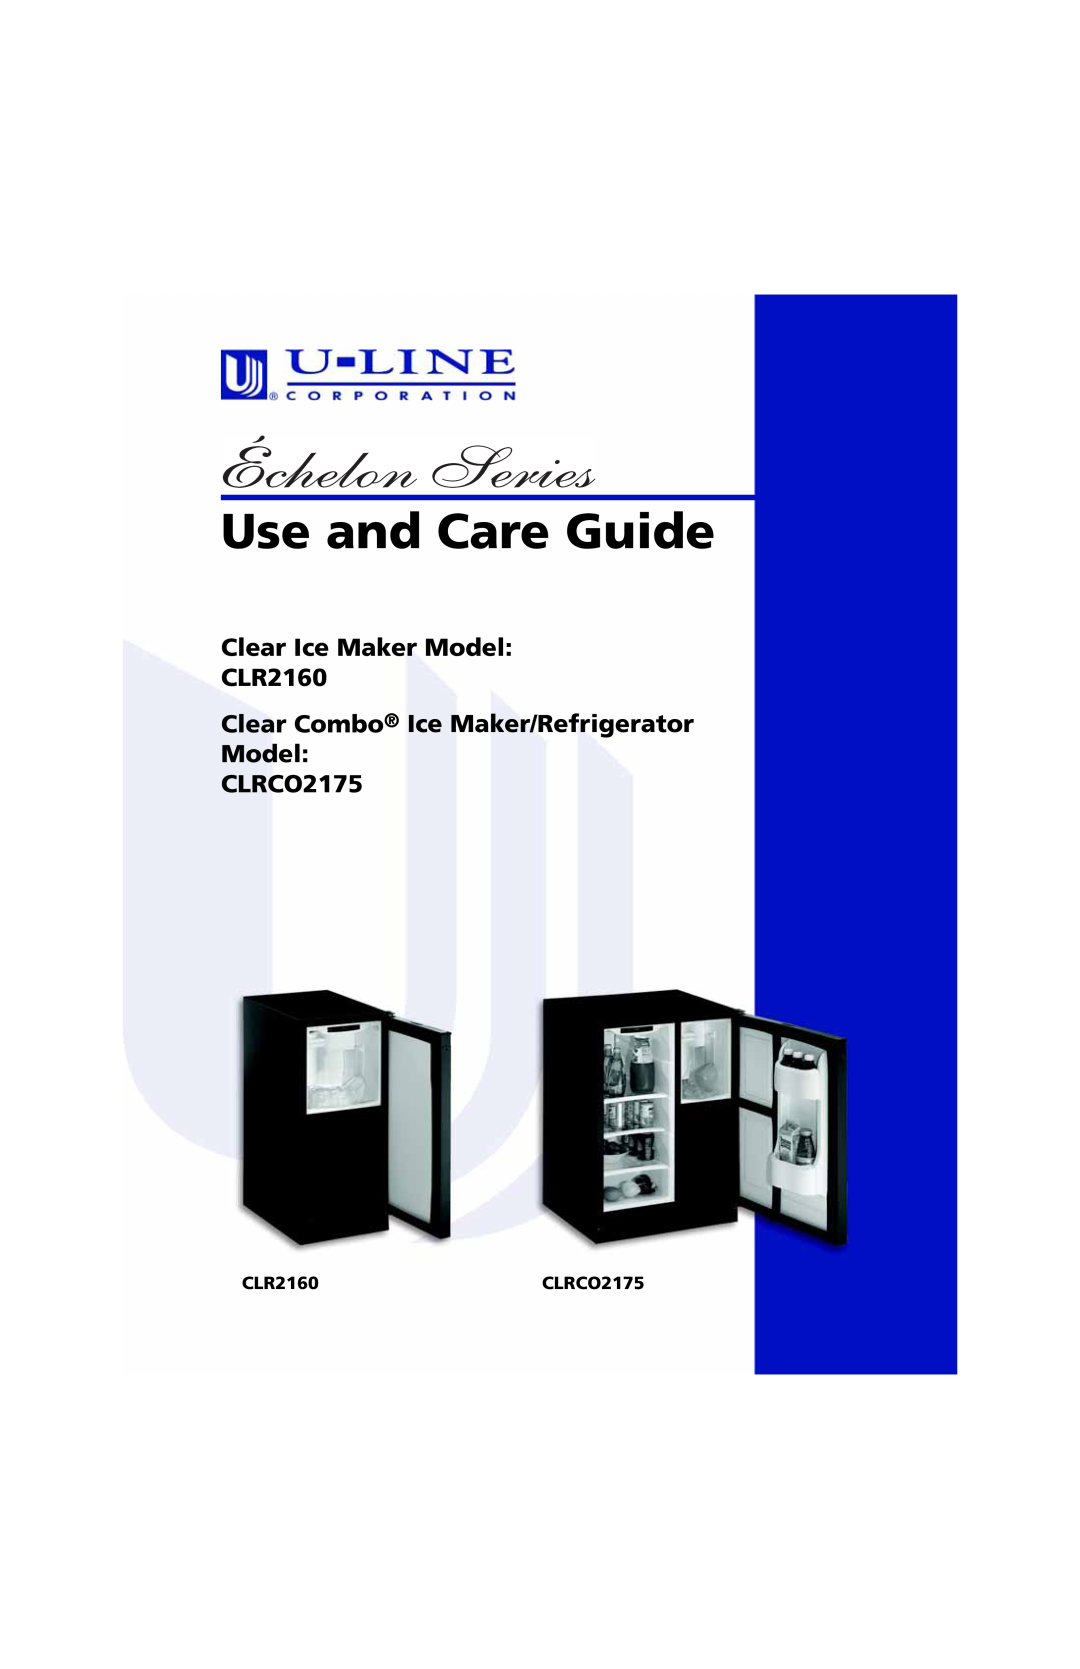 U-Line manual CLR2160CLRCO2175, Use and Care Guide, Clear Ice Maker Model CLR2160 Clear Combo Ice Maker/Refrigerator 